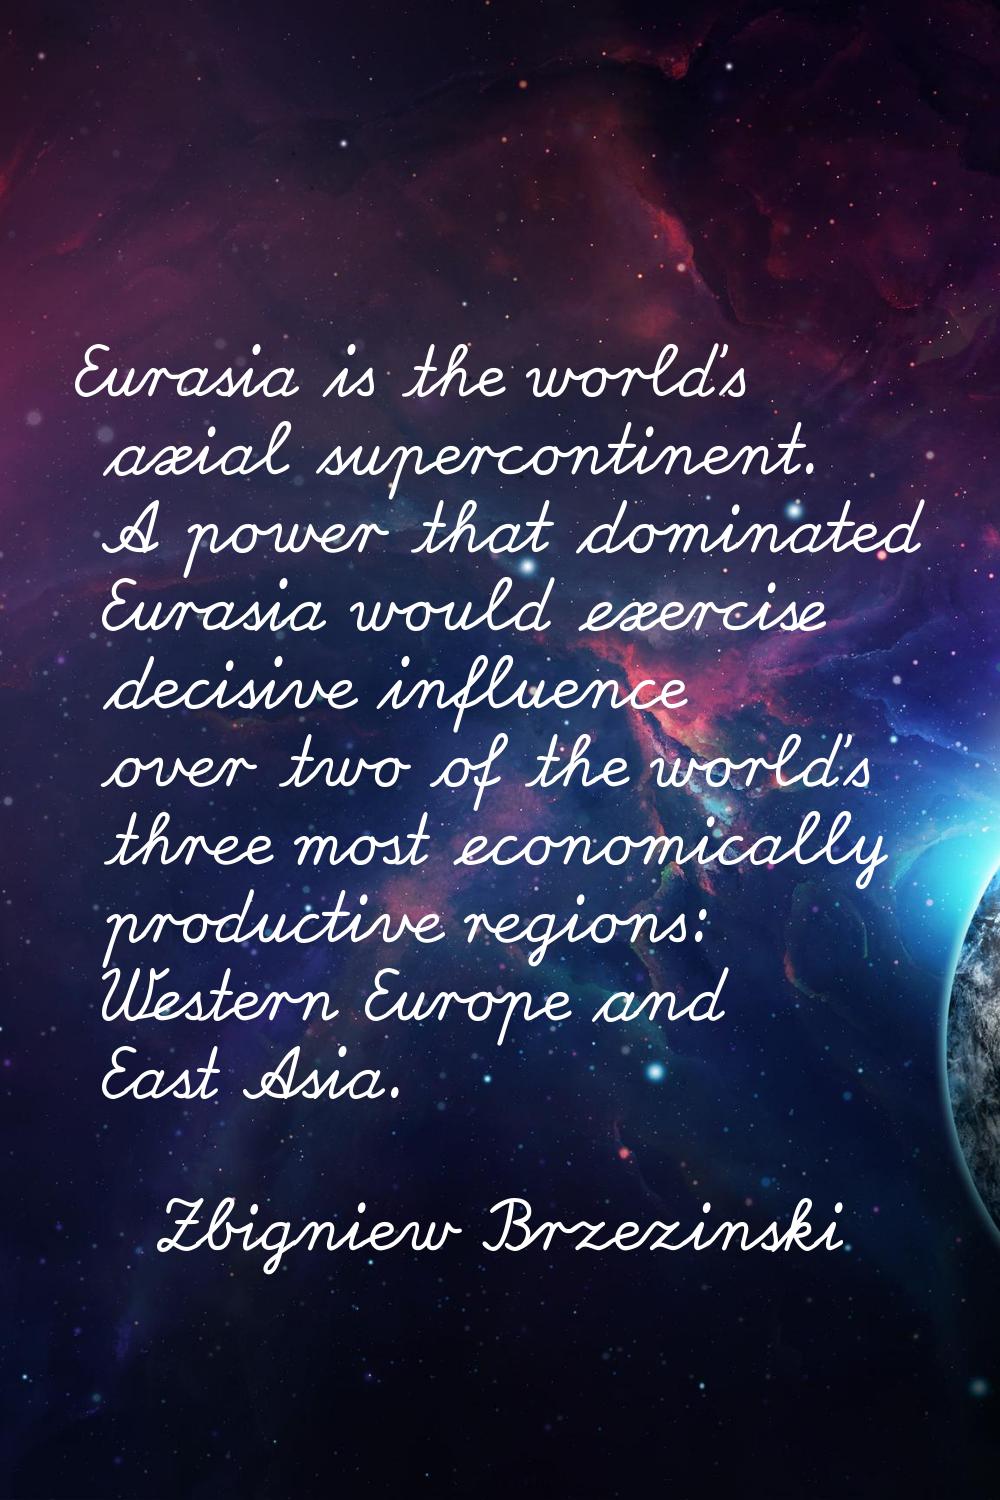 Eurasia is the world's axial supercontinent. A power that dominated Eurasia would exercise decisive